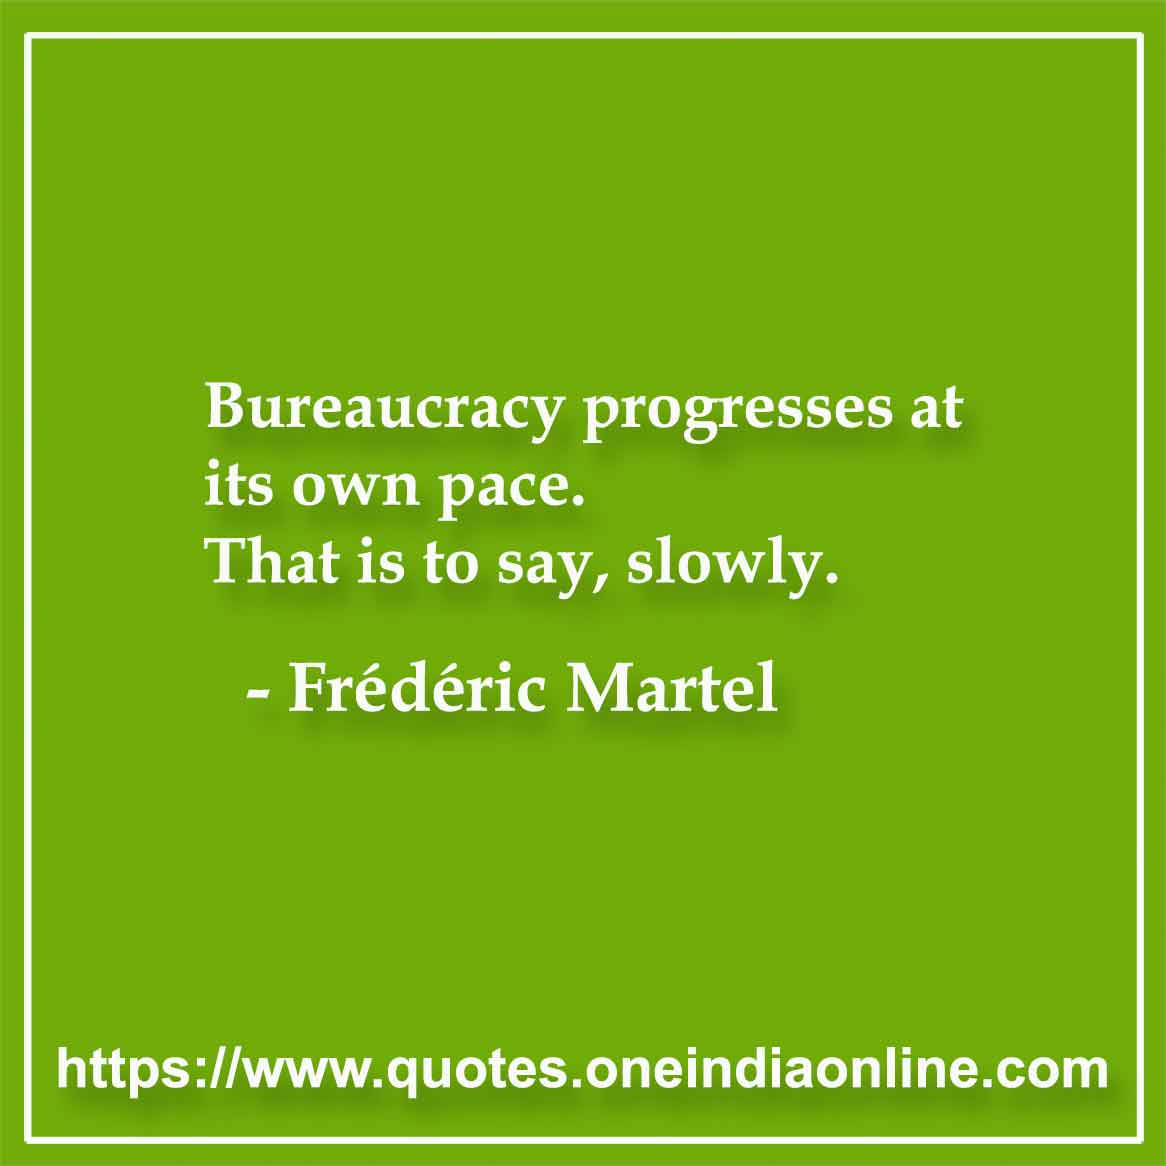 Bureaucracy progresses at its own pace. That is to say, slowly.

- Frédéric Martel